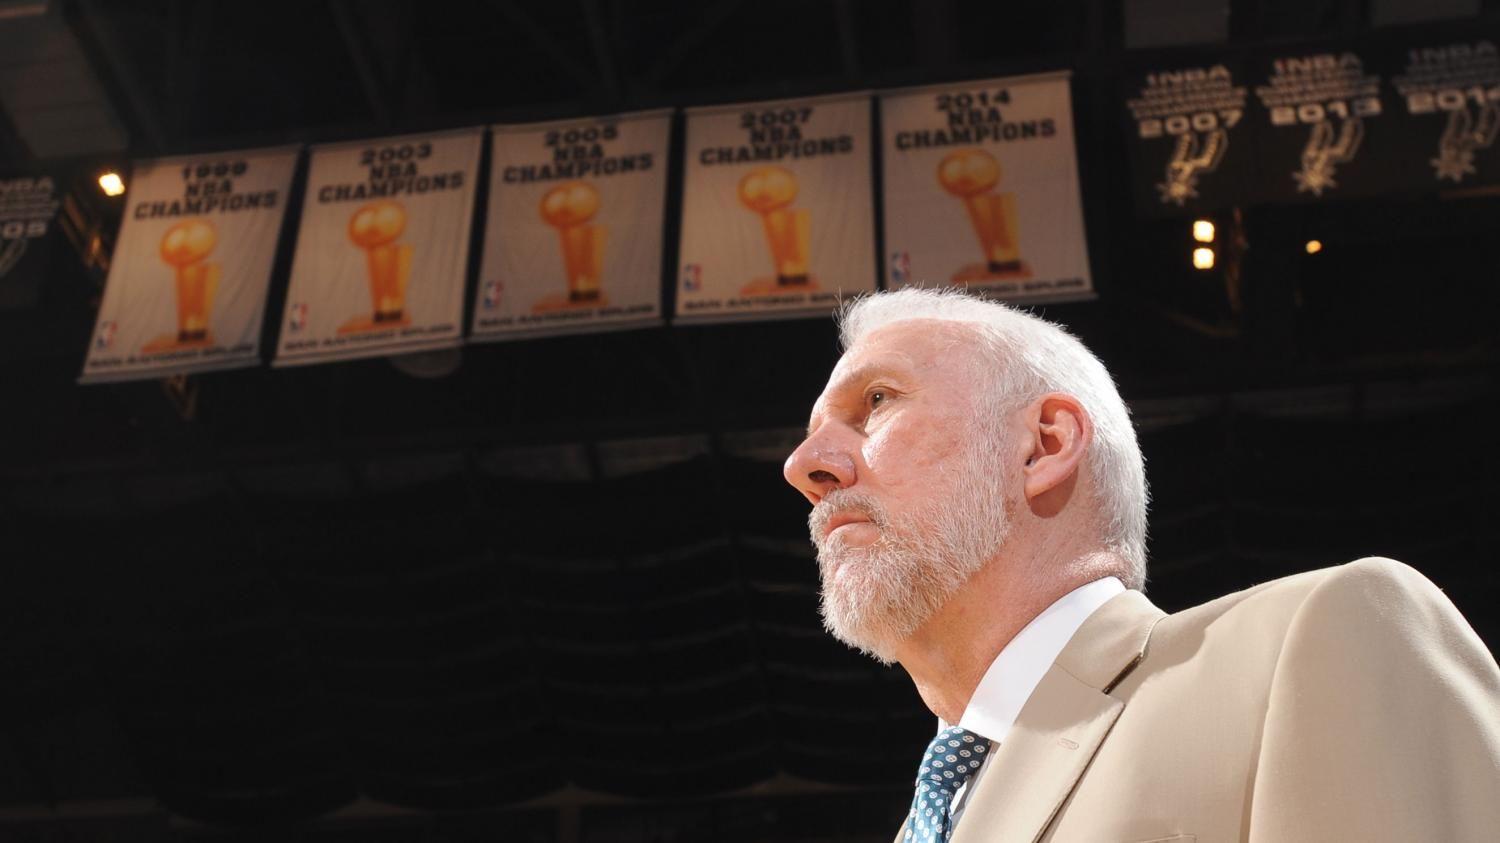 Gregg Popovich on Super Teams: 'I Just Count the Championships